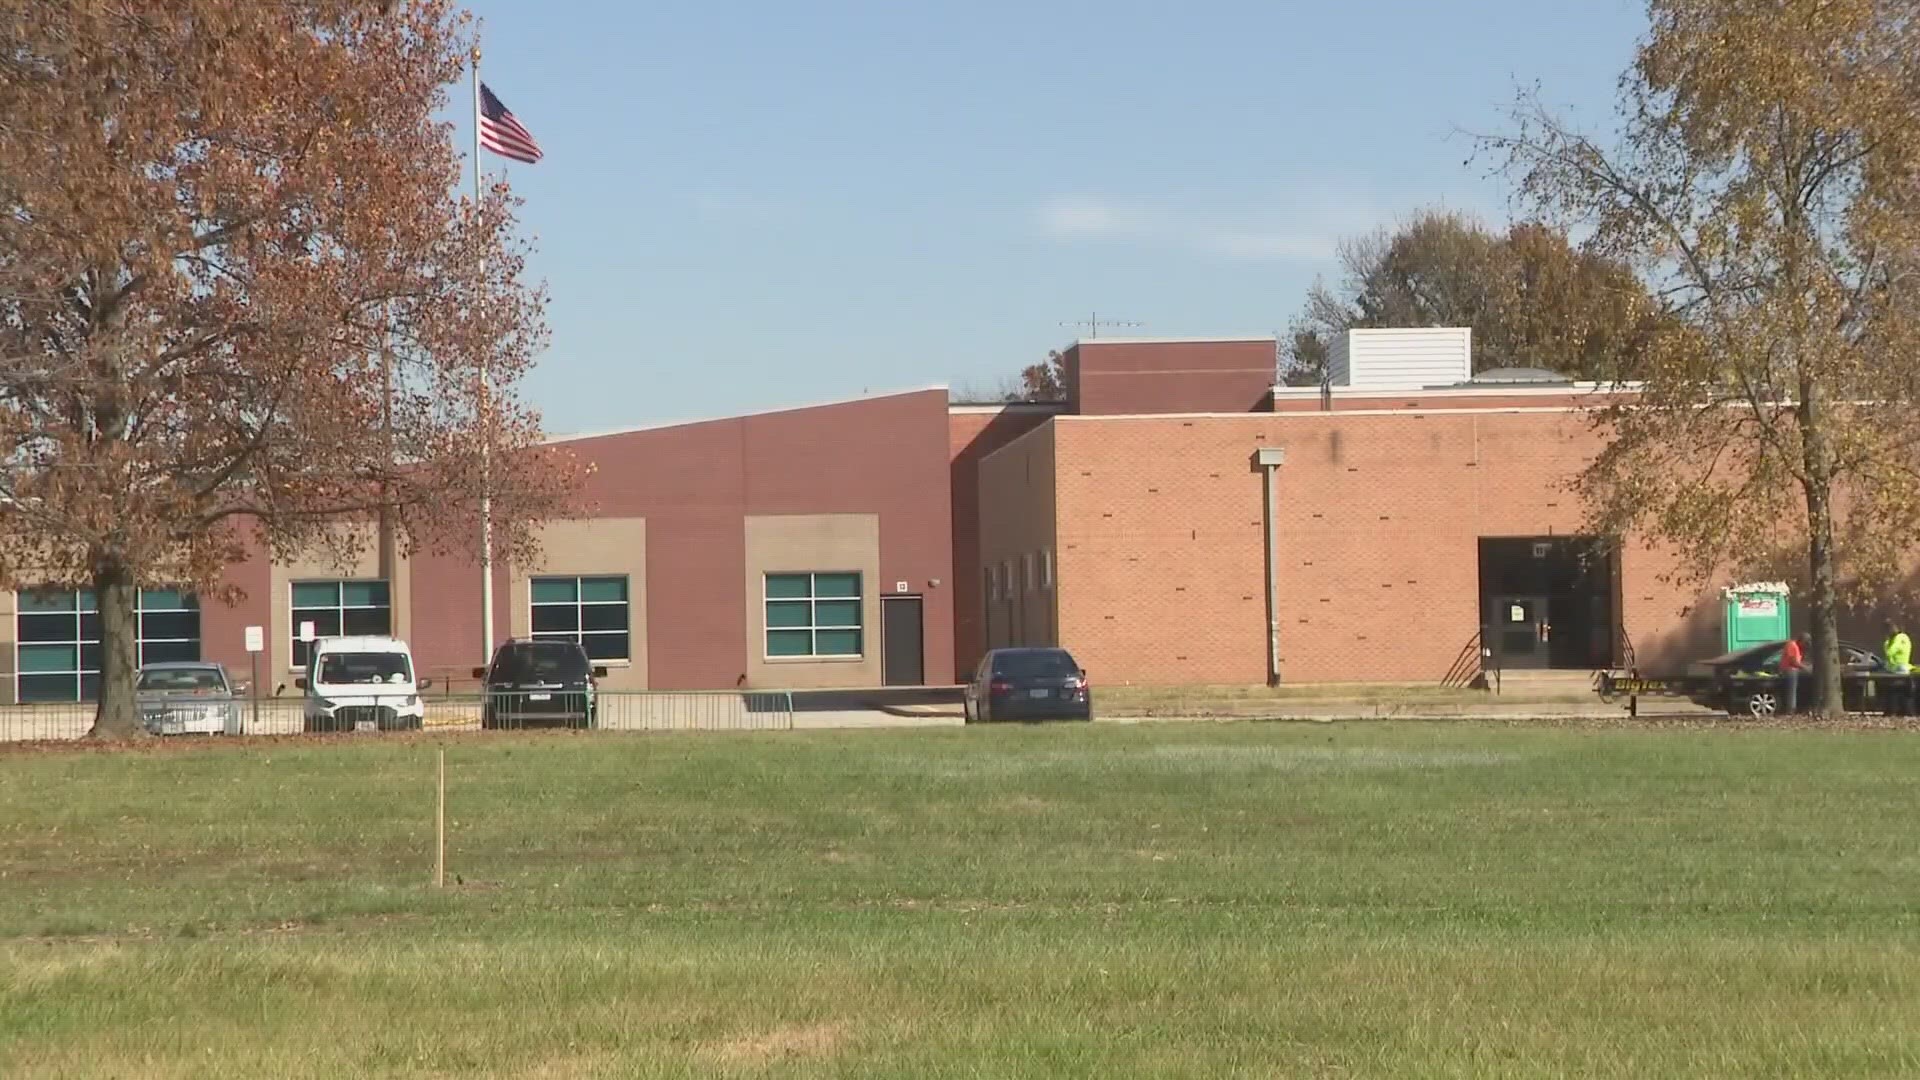 The USACE's final report was released Tuesday. It stated there were "no areas of radiological concerns" in or around Jana Elementary School.